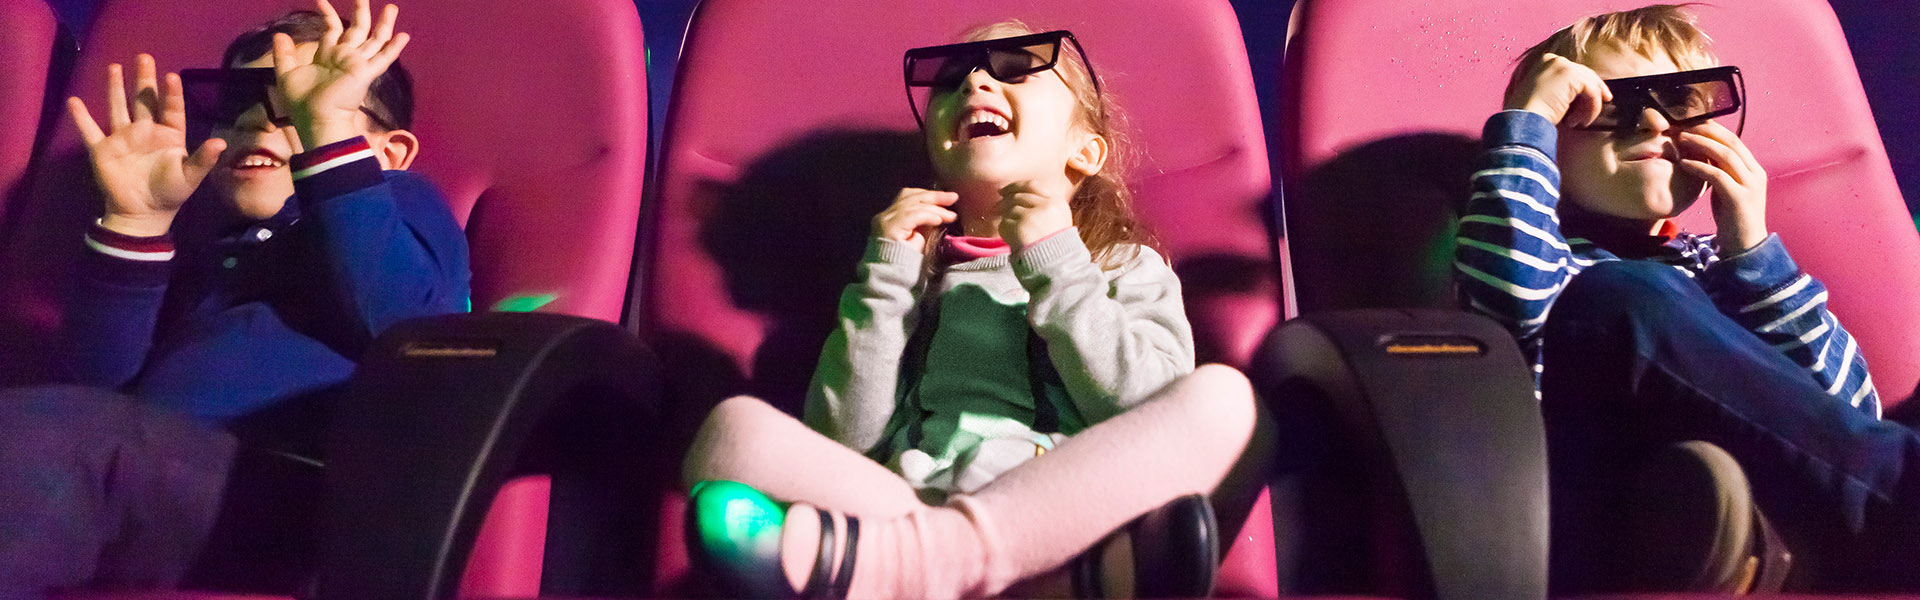 Three children in a movie theater with 3D glasses